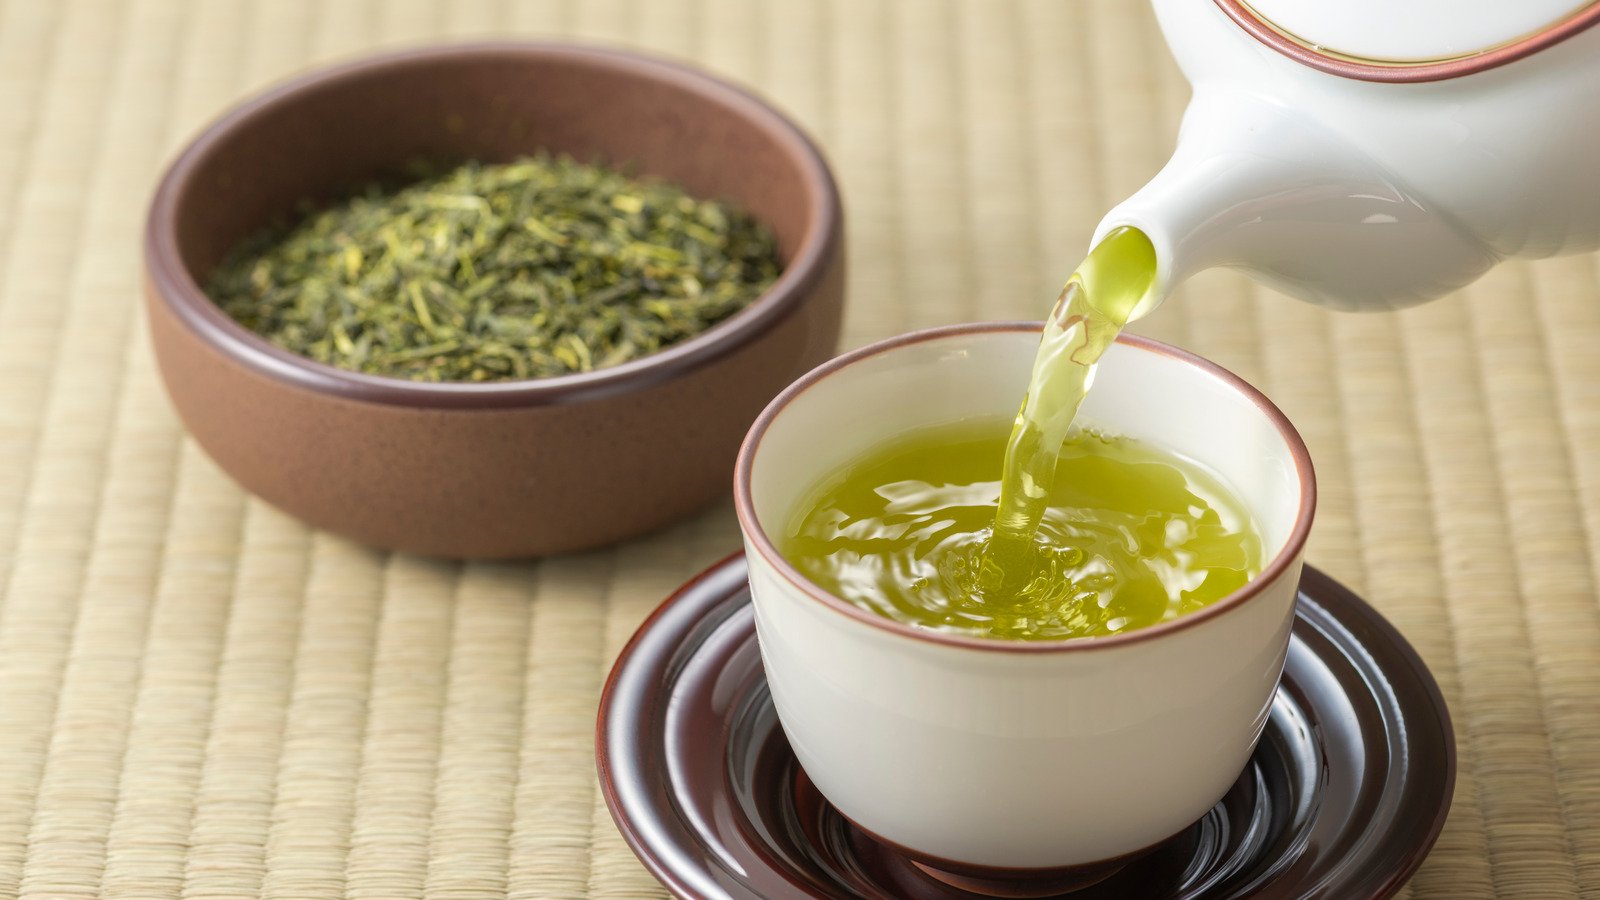 Green Vs. Black Tea: Which Is Better For You? - Mashed